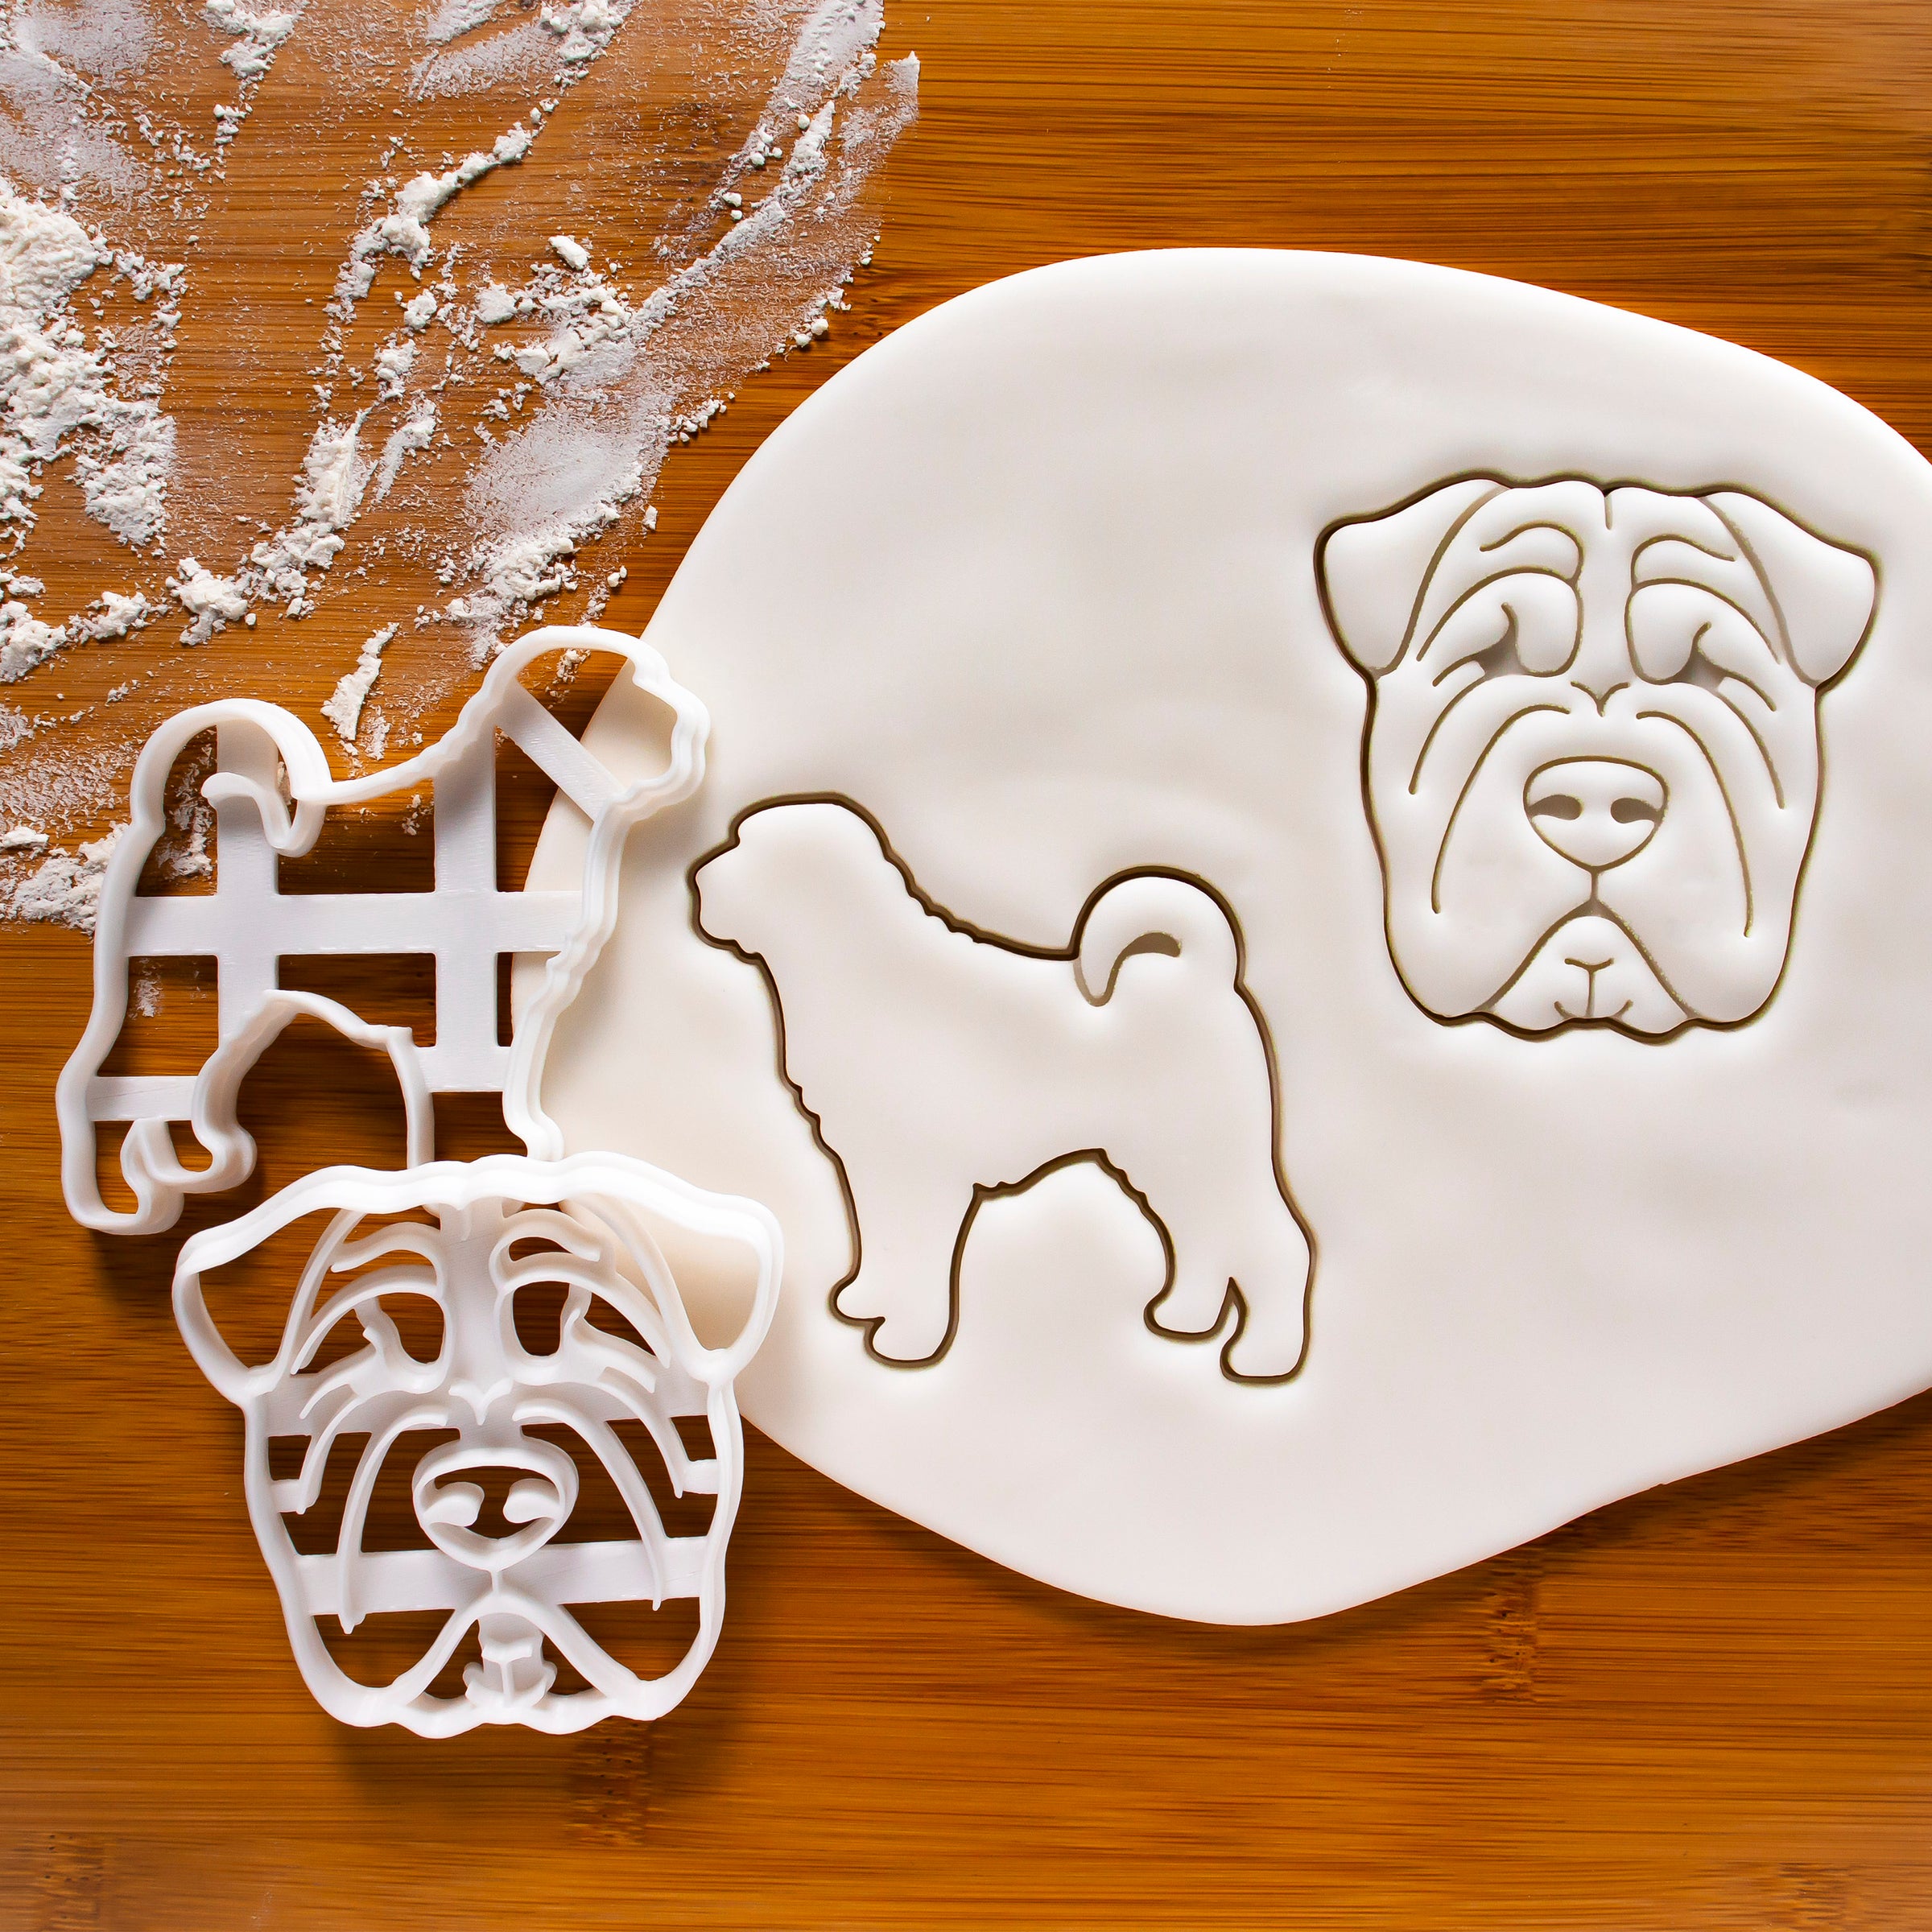 Set of 2 Shar Pei cookie cutters